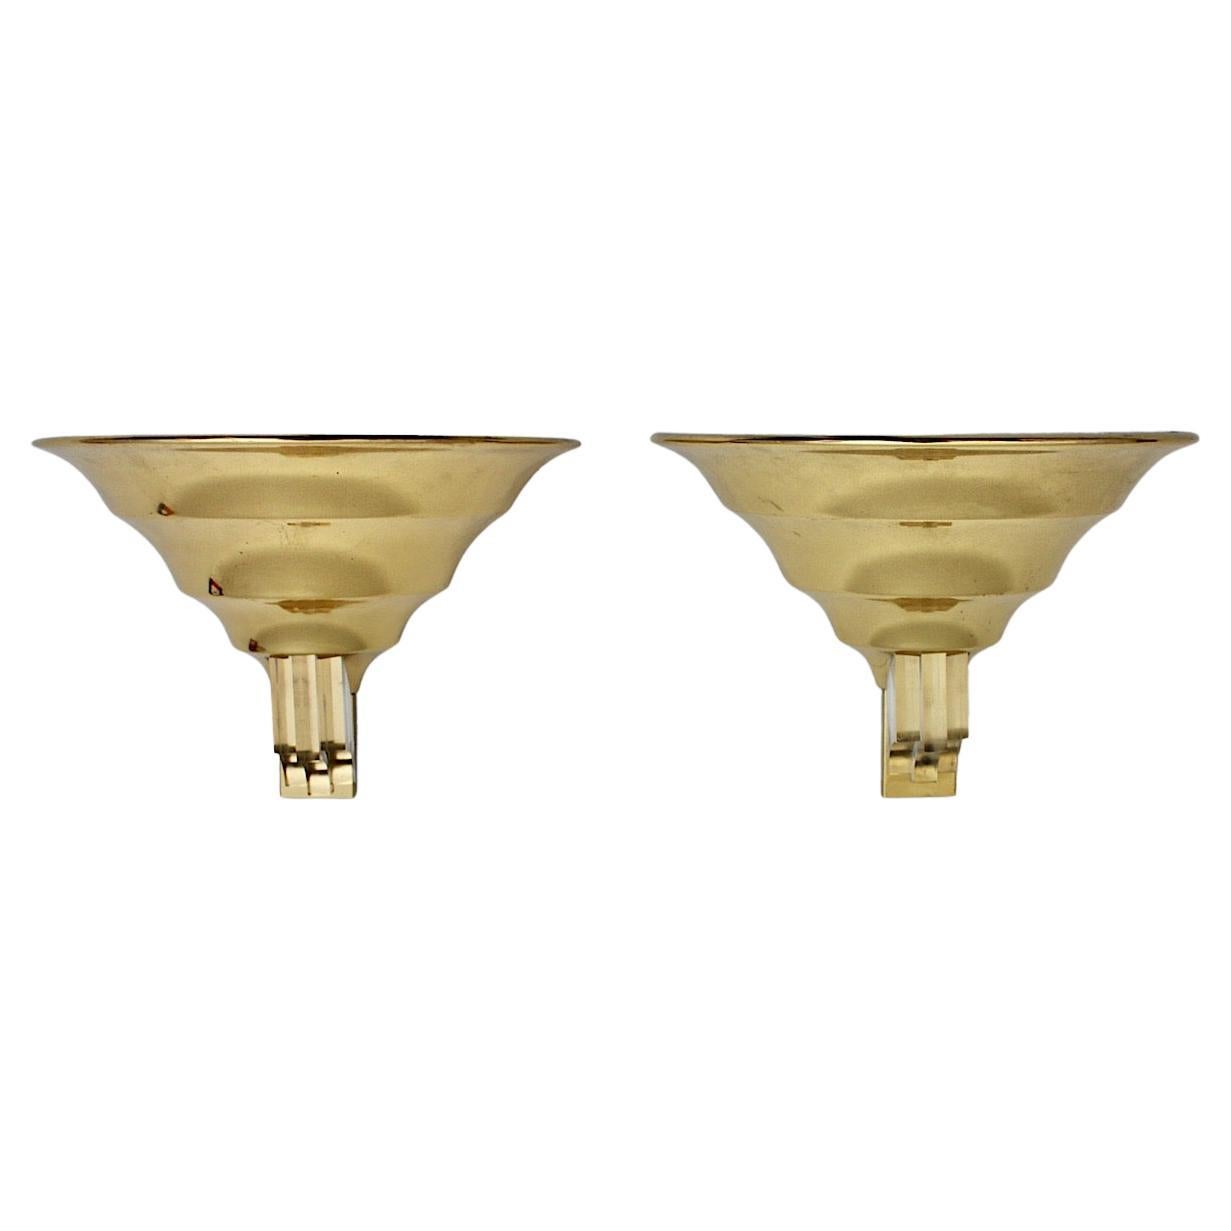 Art Deco Style Vintage Brass Lucite Sconces Wall Lights Duo Pair 1980s Italy For Sale